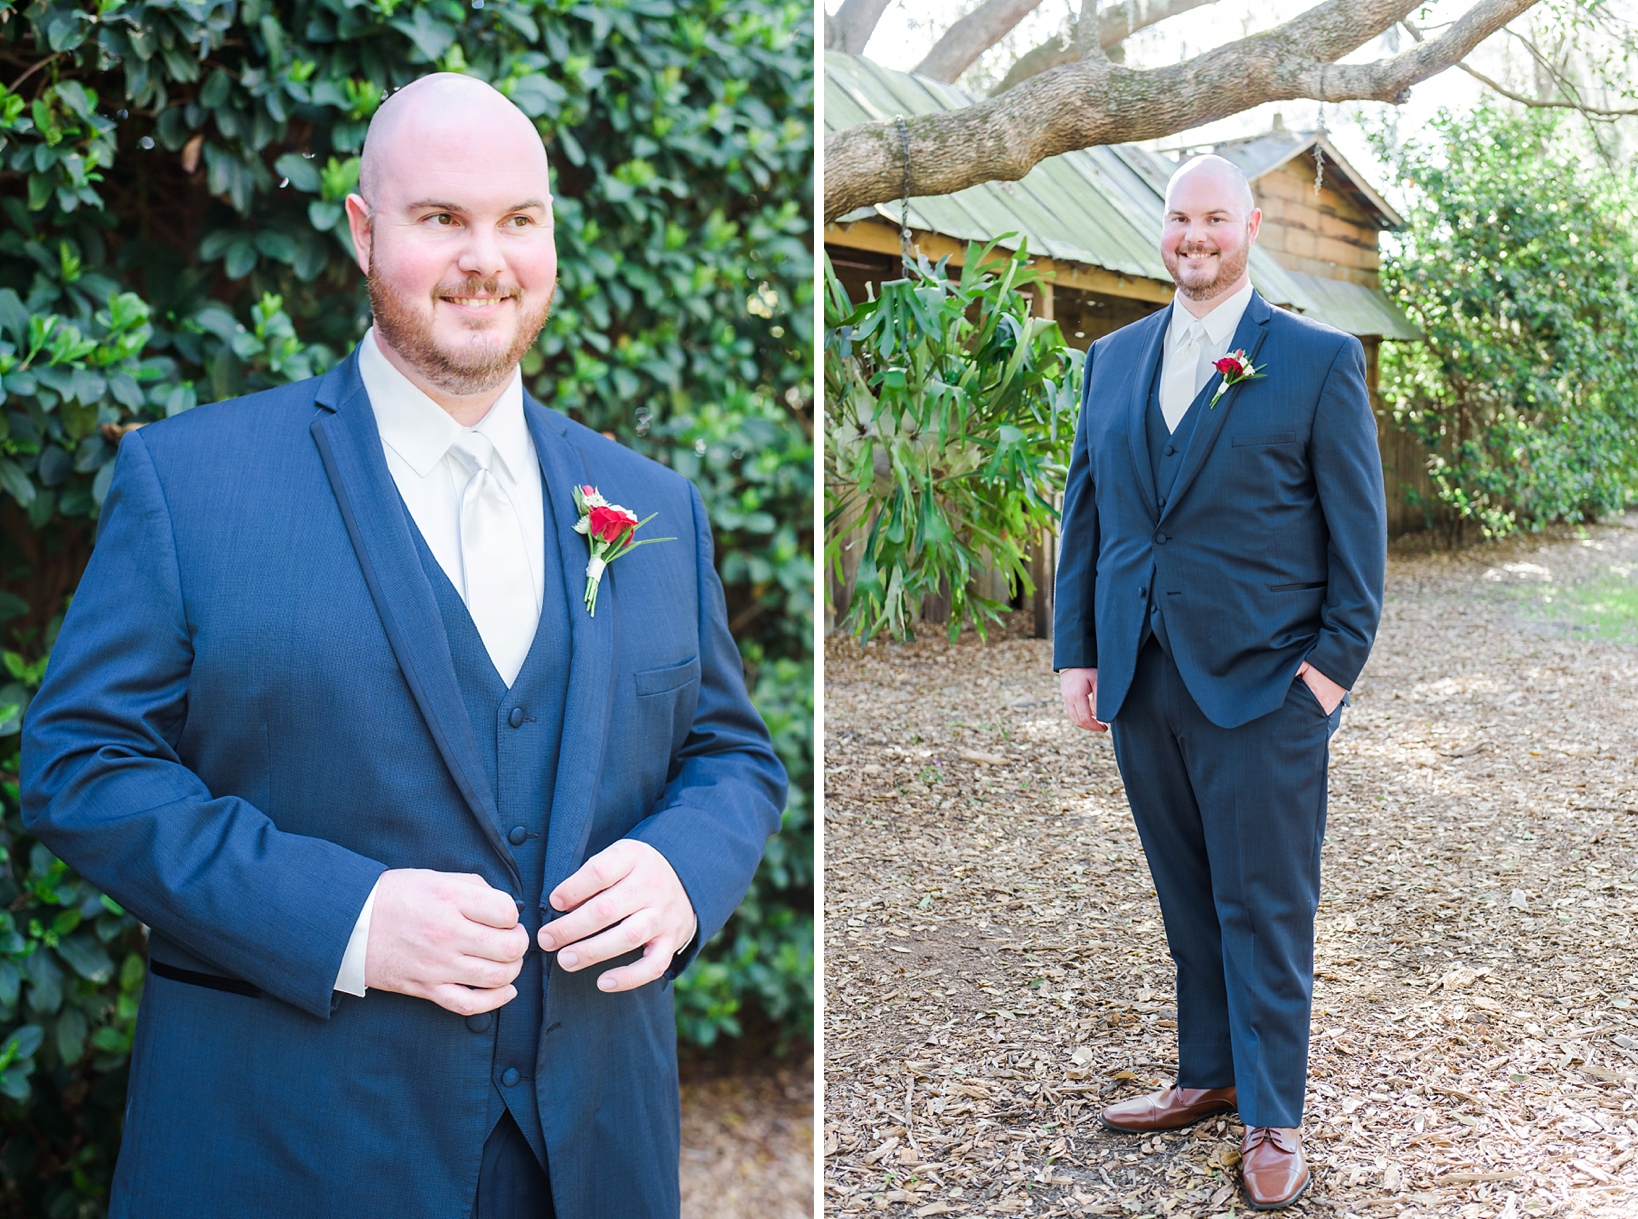 Groom in navy suit with red floral boutonniere 